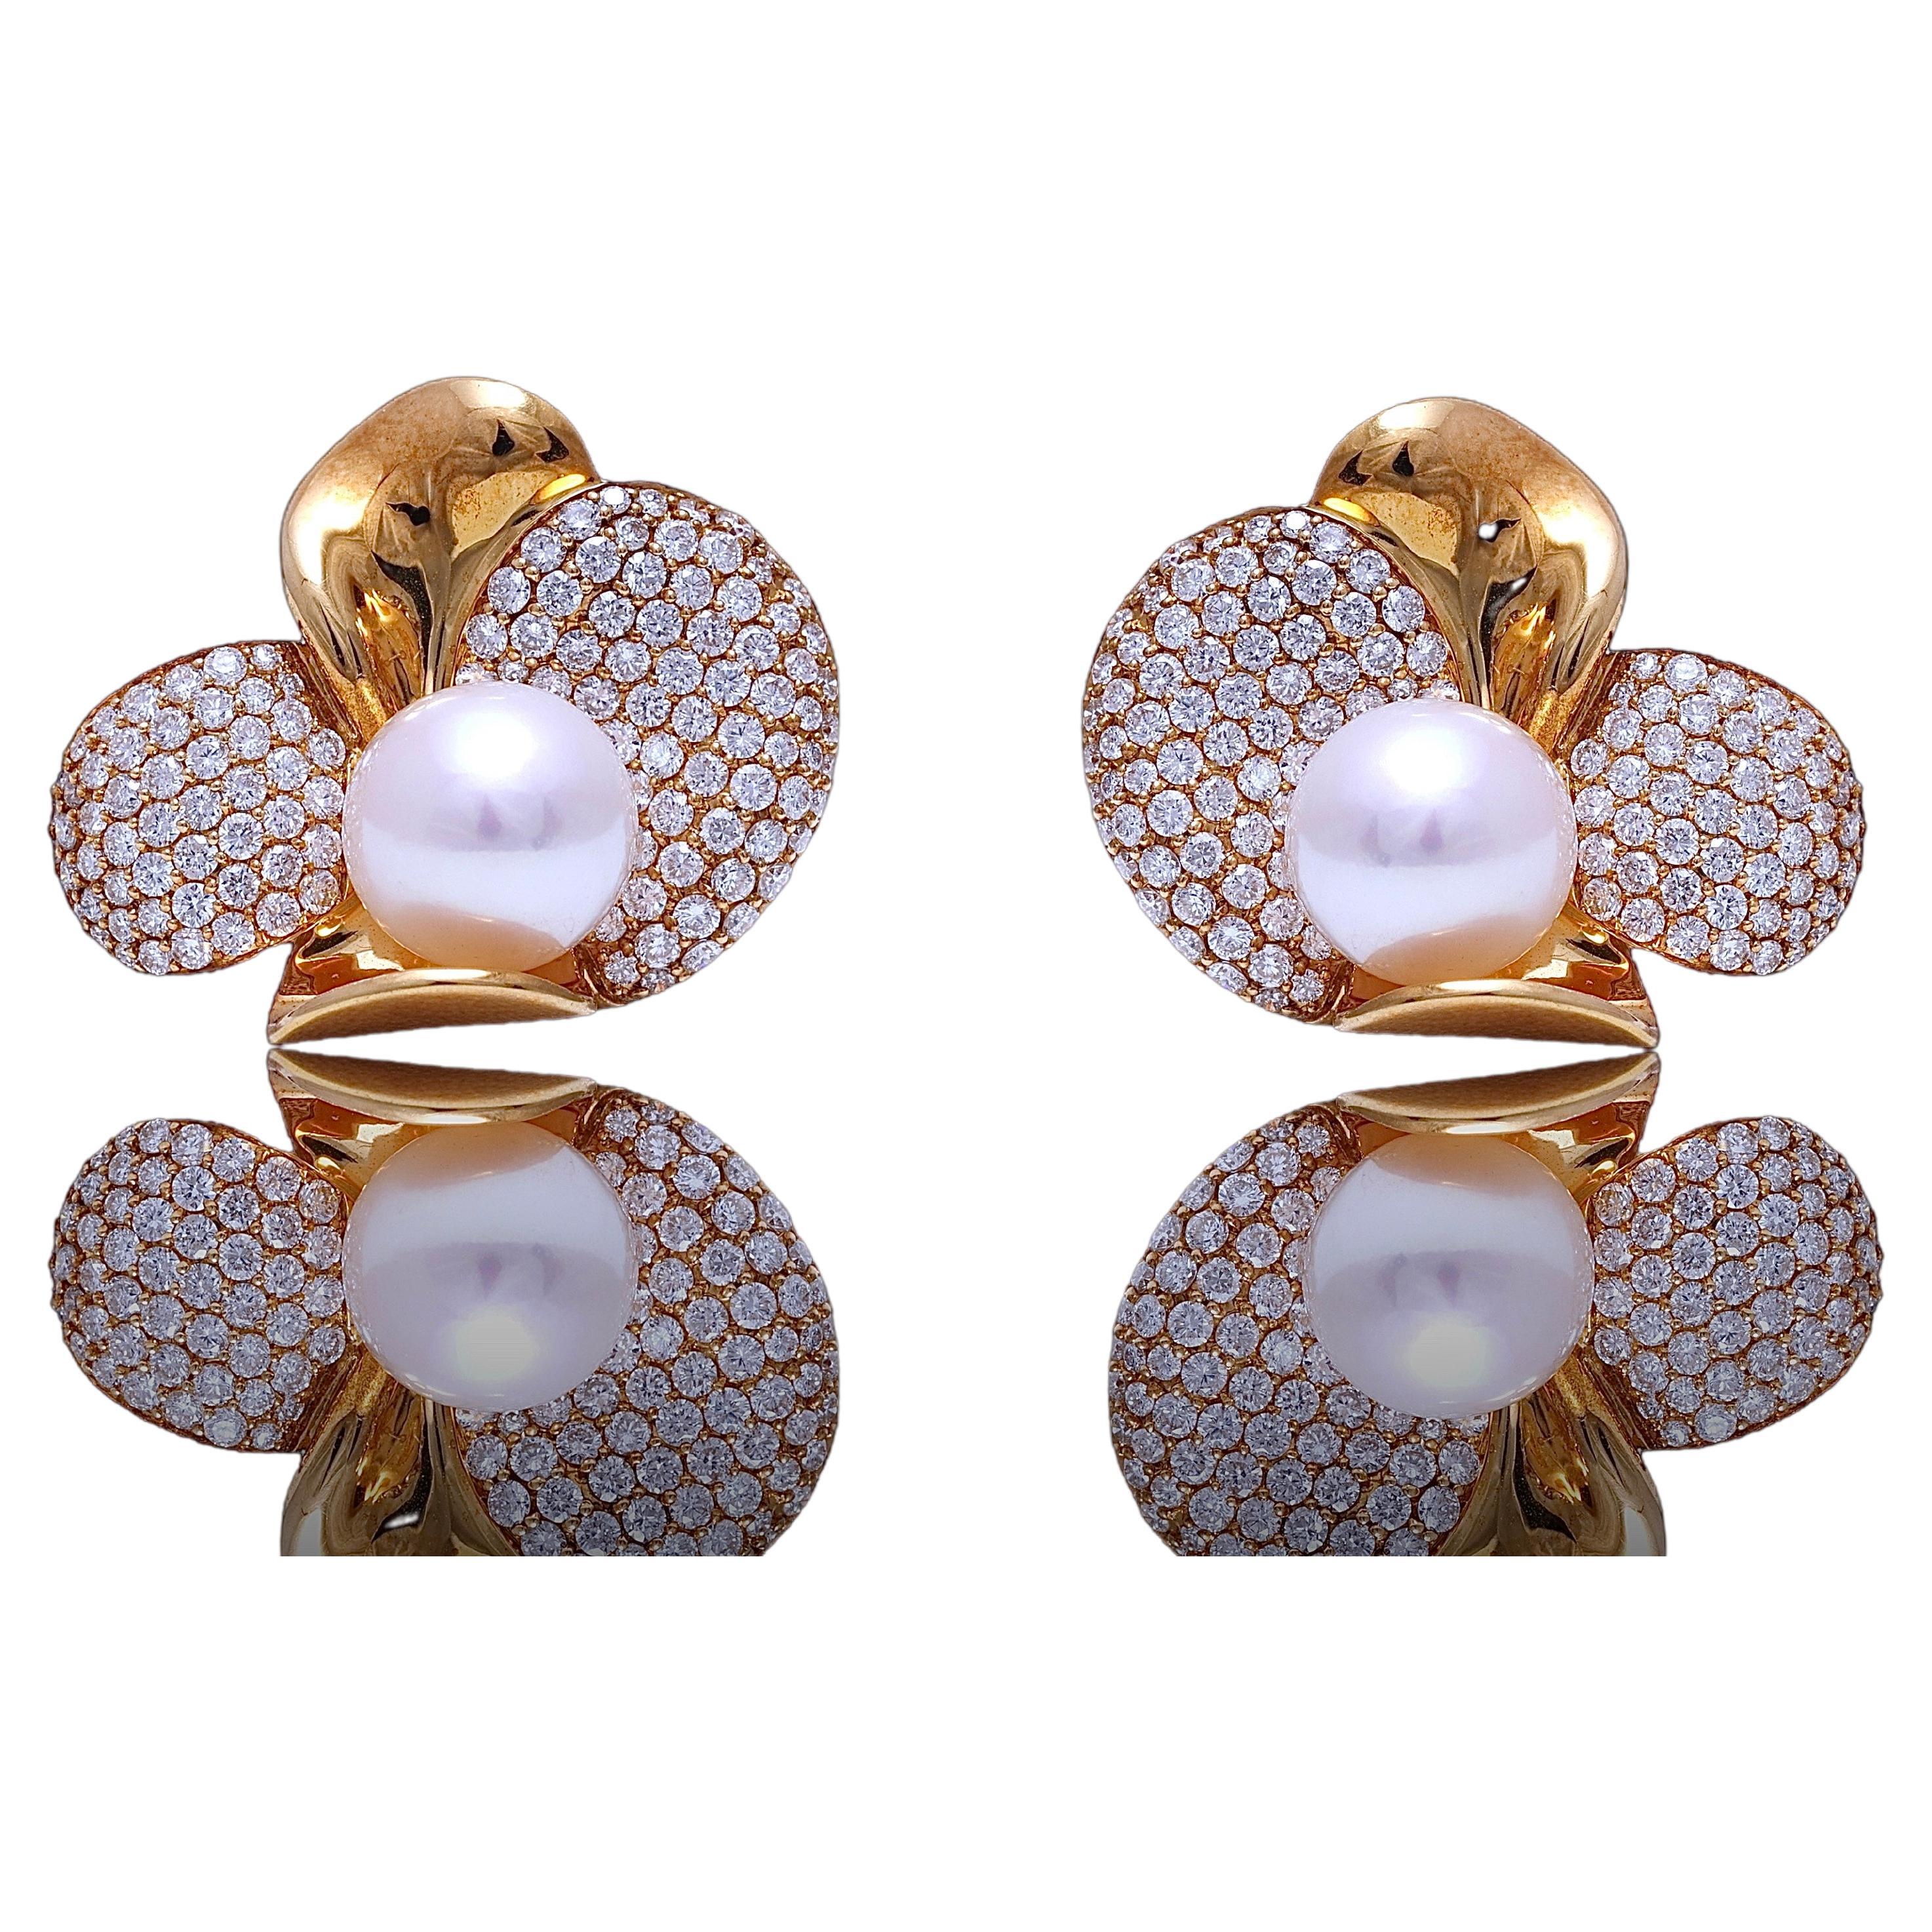 18 Kt Yellow Gold Clip on Earrings with Diamonds & Akoya Pearl

Diamonds : 2.2 Ct Top Quality 
Pearls : Akoya 8.5 mm ,beautiful luster

Measurements: 22.5 mm x 25.2 mm x15.9 mm

Total weight: 16.1 gram 0.565oz 10.3dwt